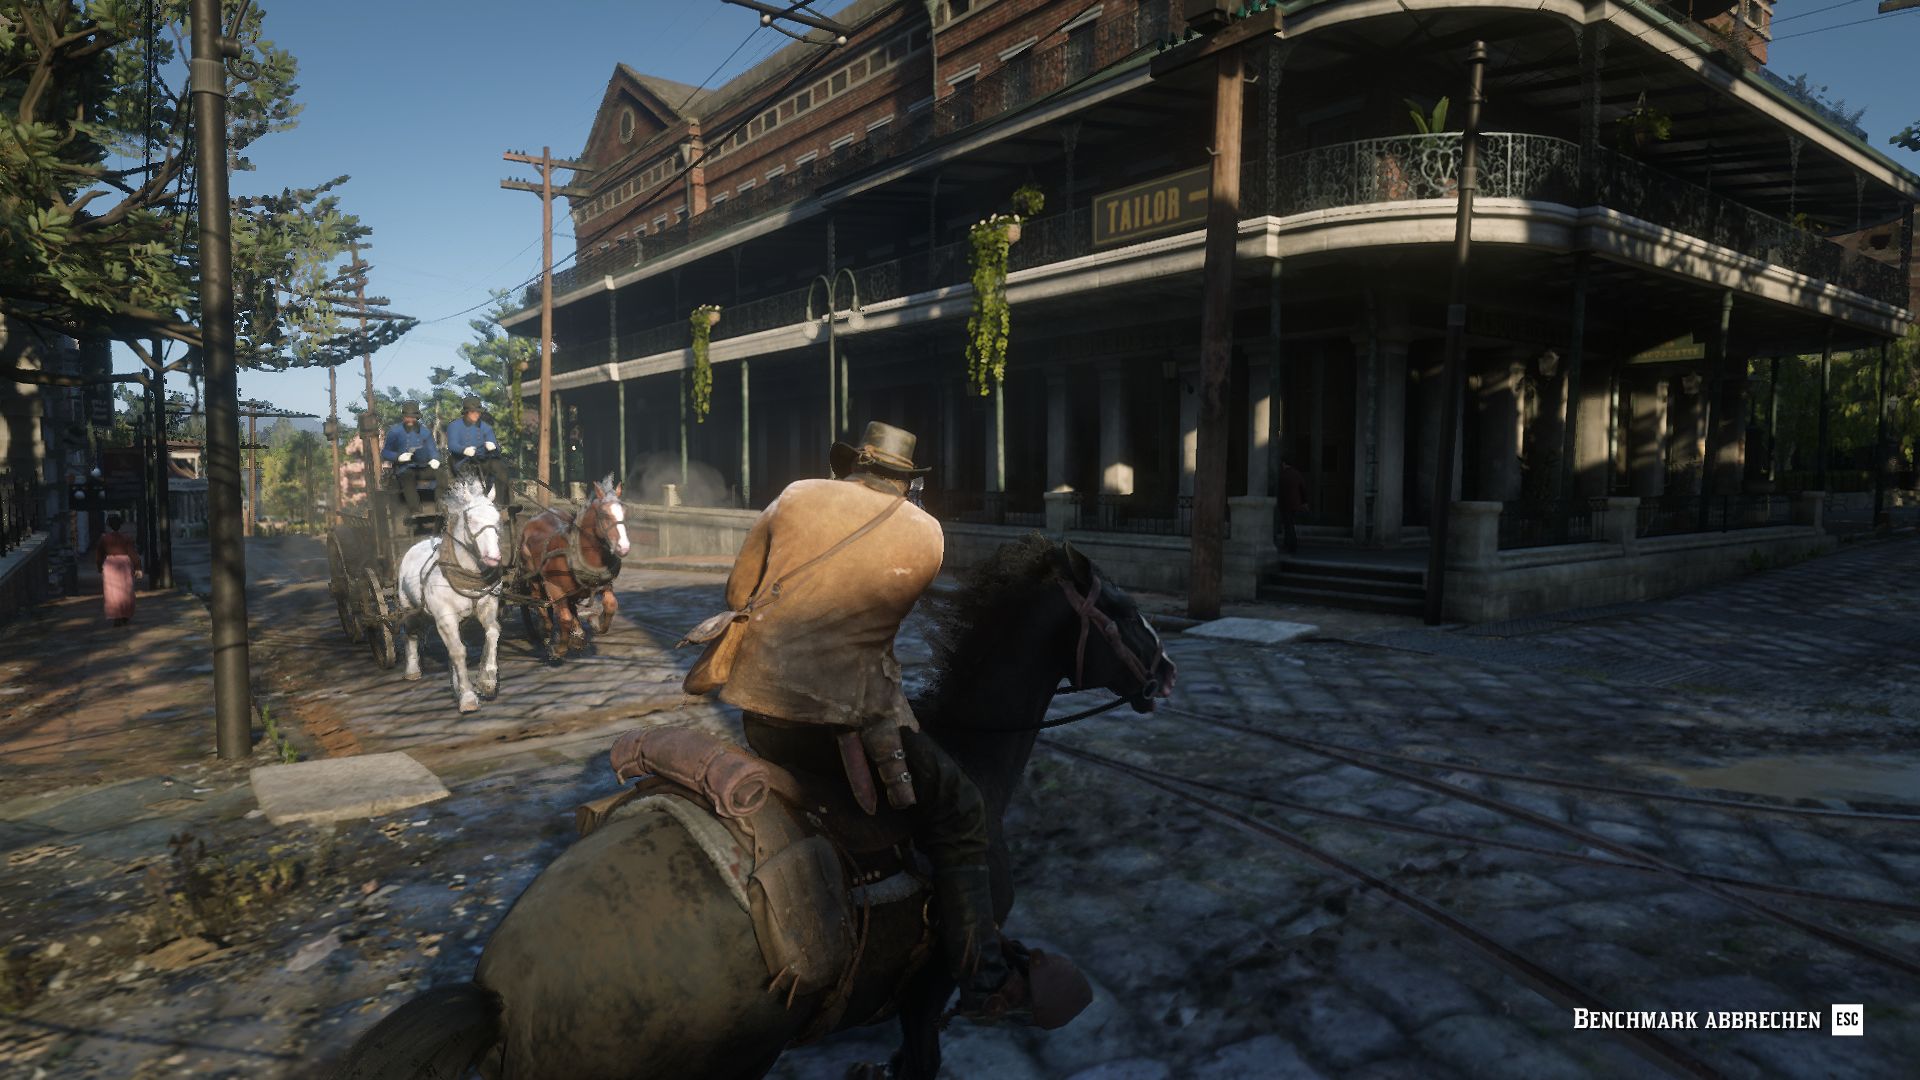 RDR2 running on a $300 pc with integrated graphics : r/pcmasterrace